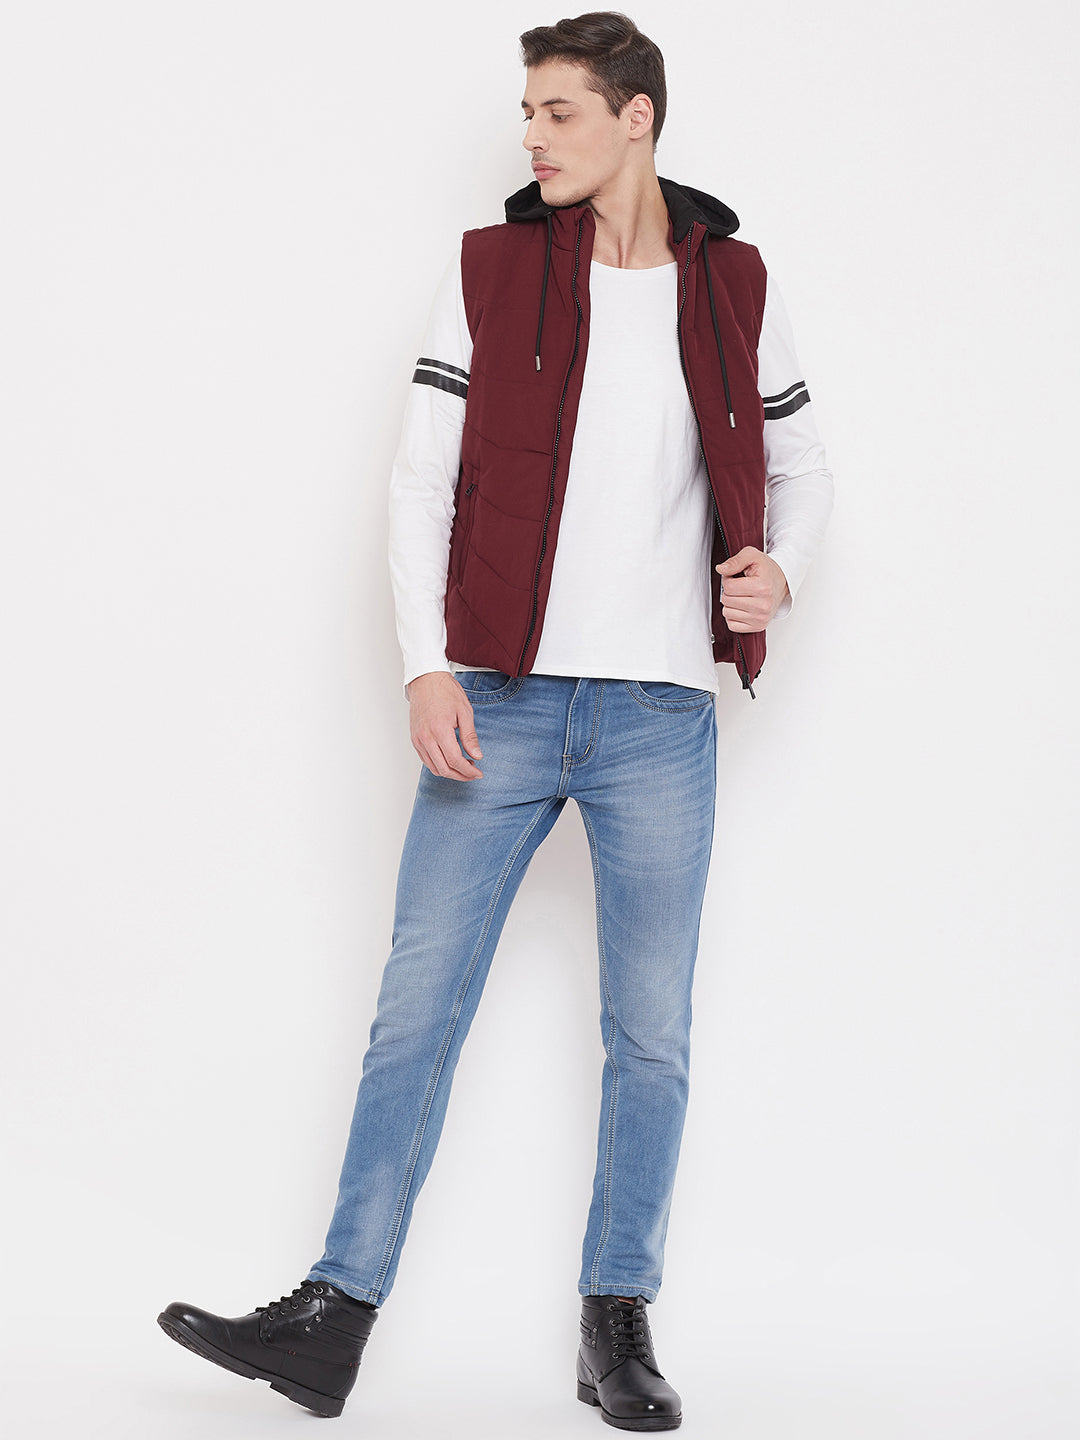 Solid Red Jacket-Mens Jackets-Crimsoune Club